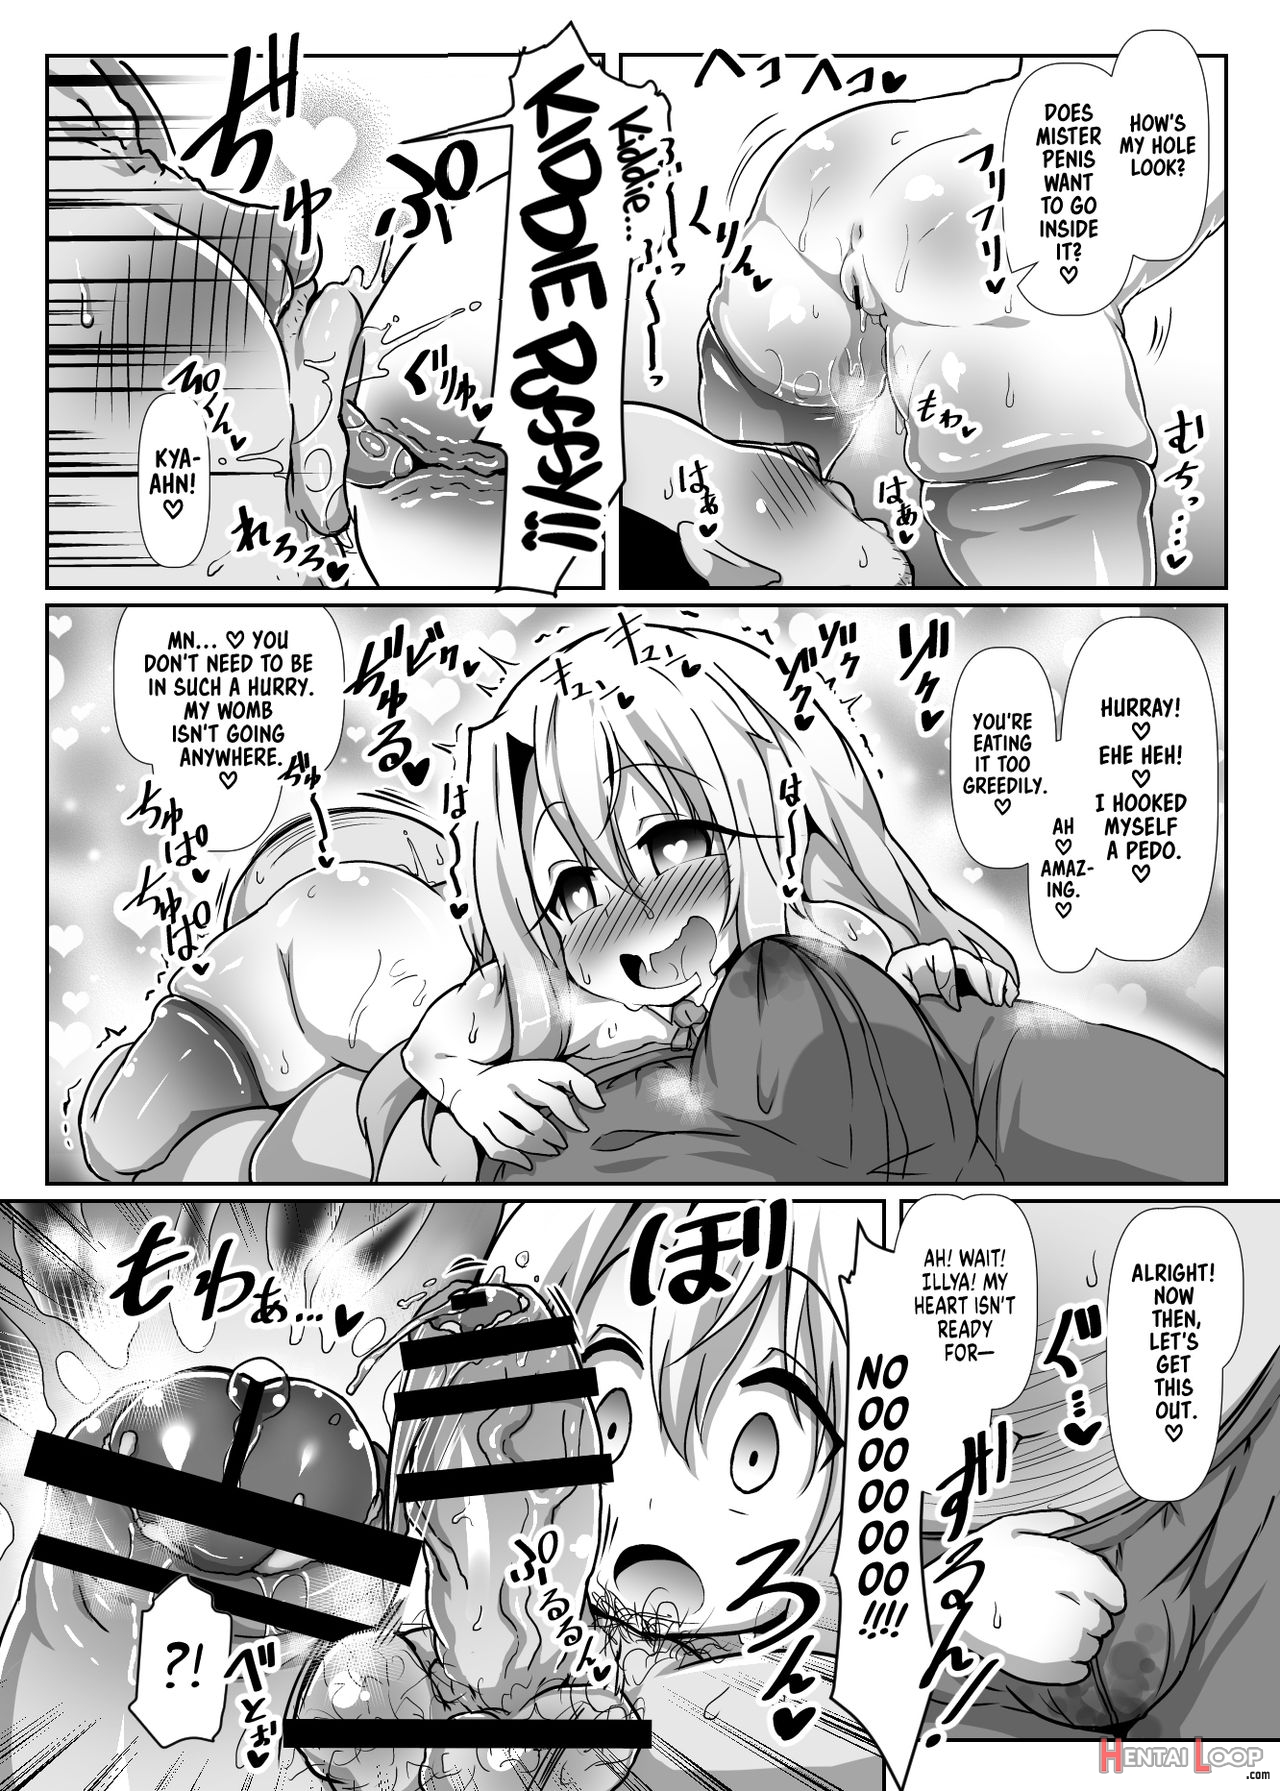 Perverted Illya-chan's Lovey Dovey Responsibility Free Baby Making Life page 7